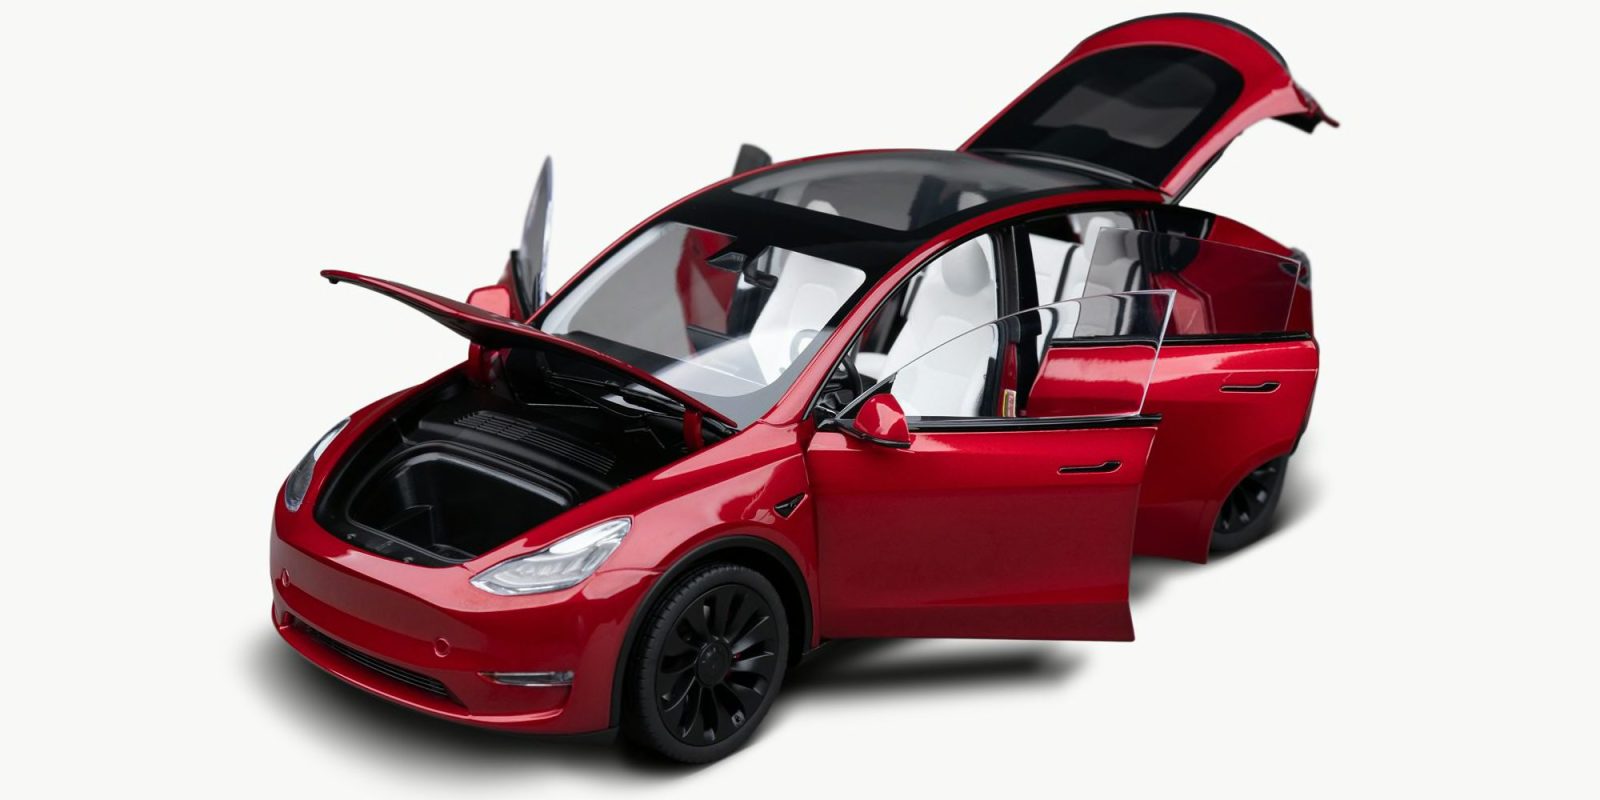 Tesla's cheapest Model Y ever is this 1:18 diecast model for $195